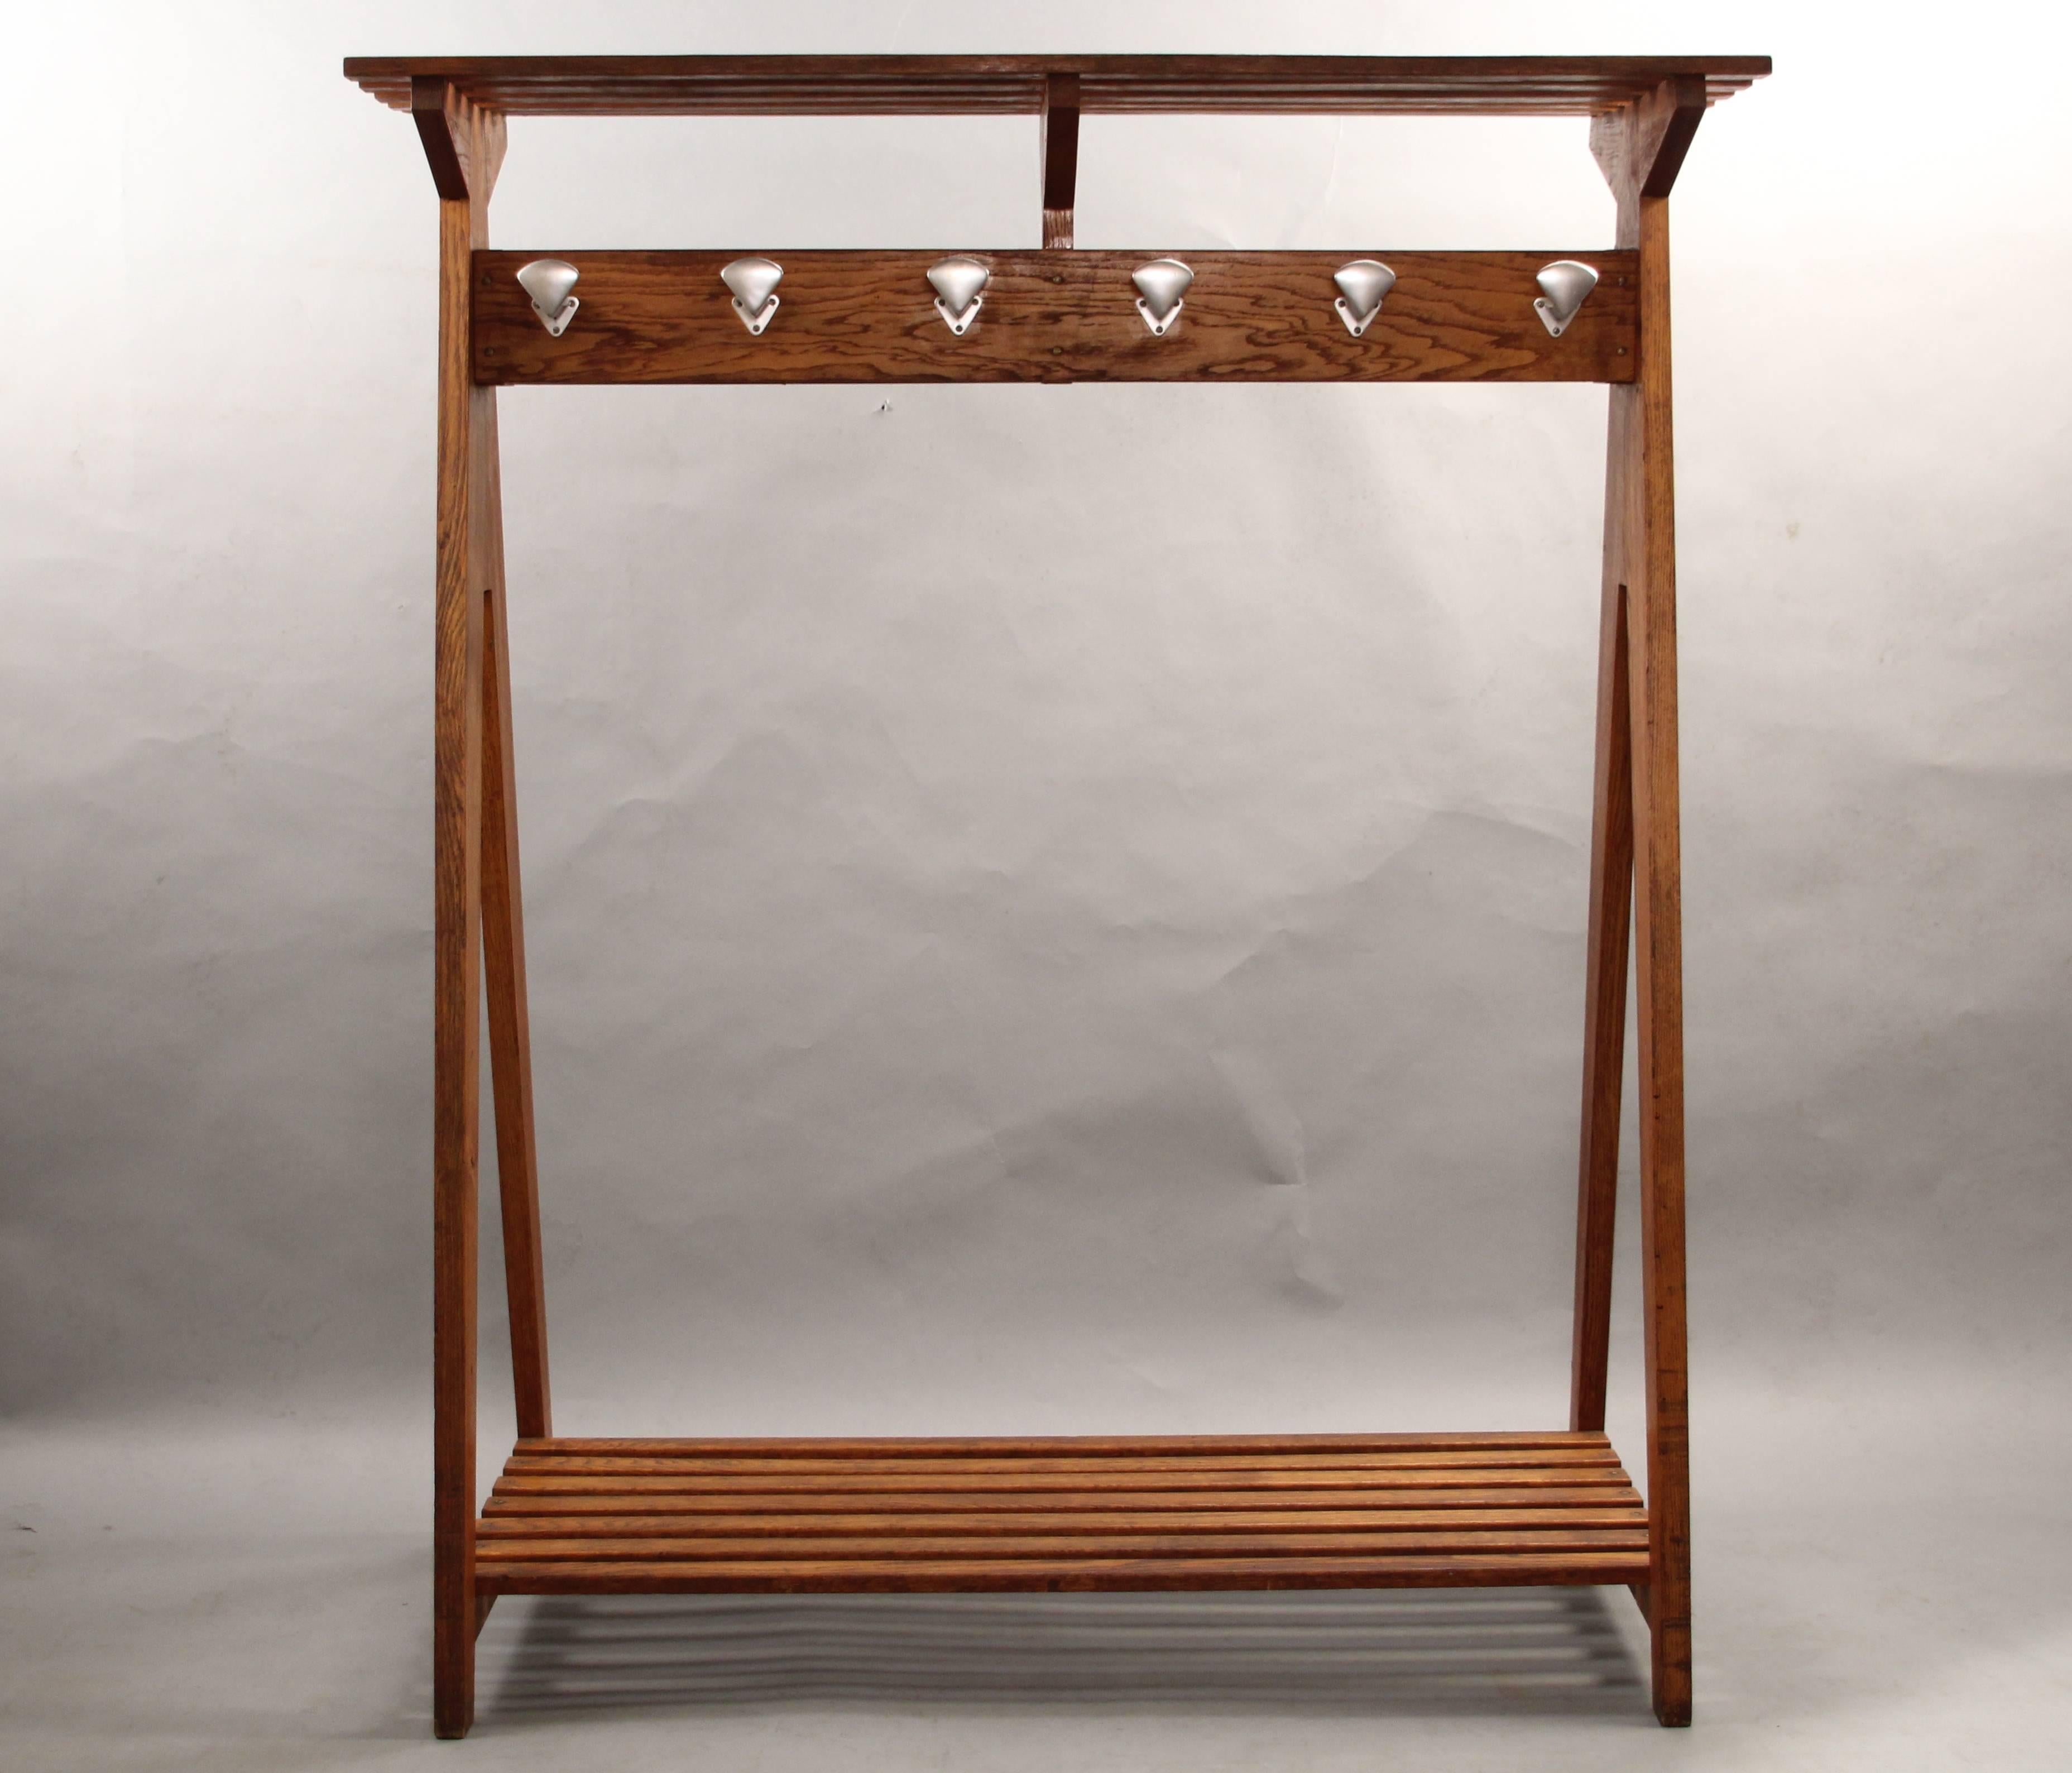 French coat rack, circa 1930s. Two sided. With slated top and bottom shelves. Measures: 70.5